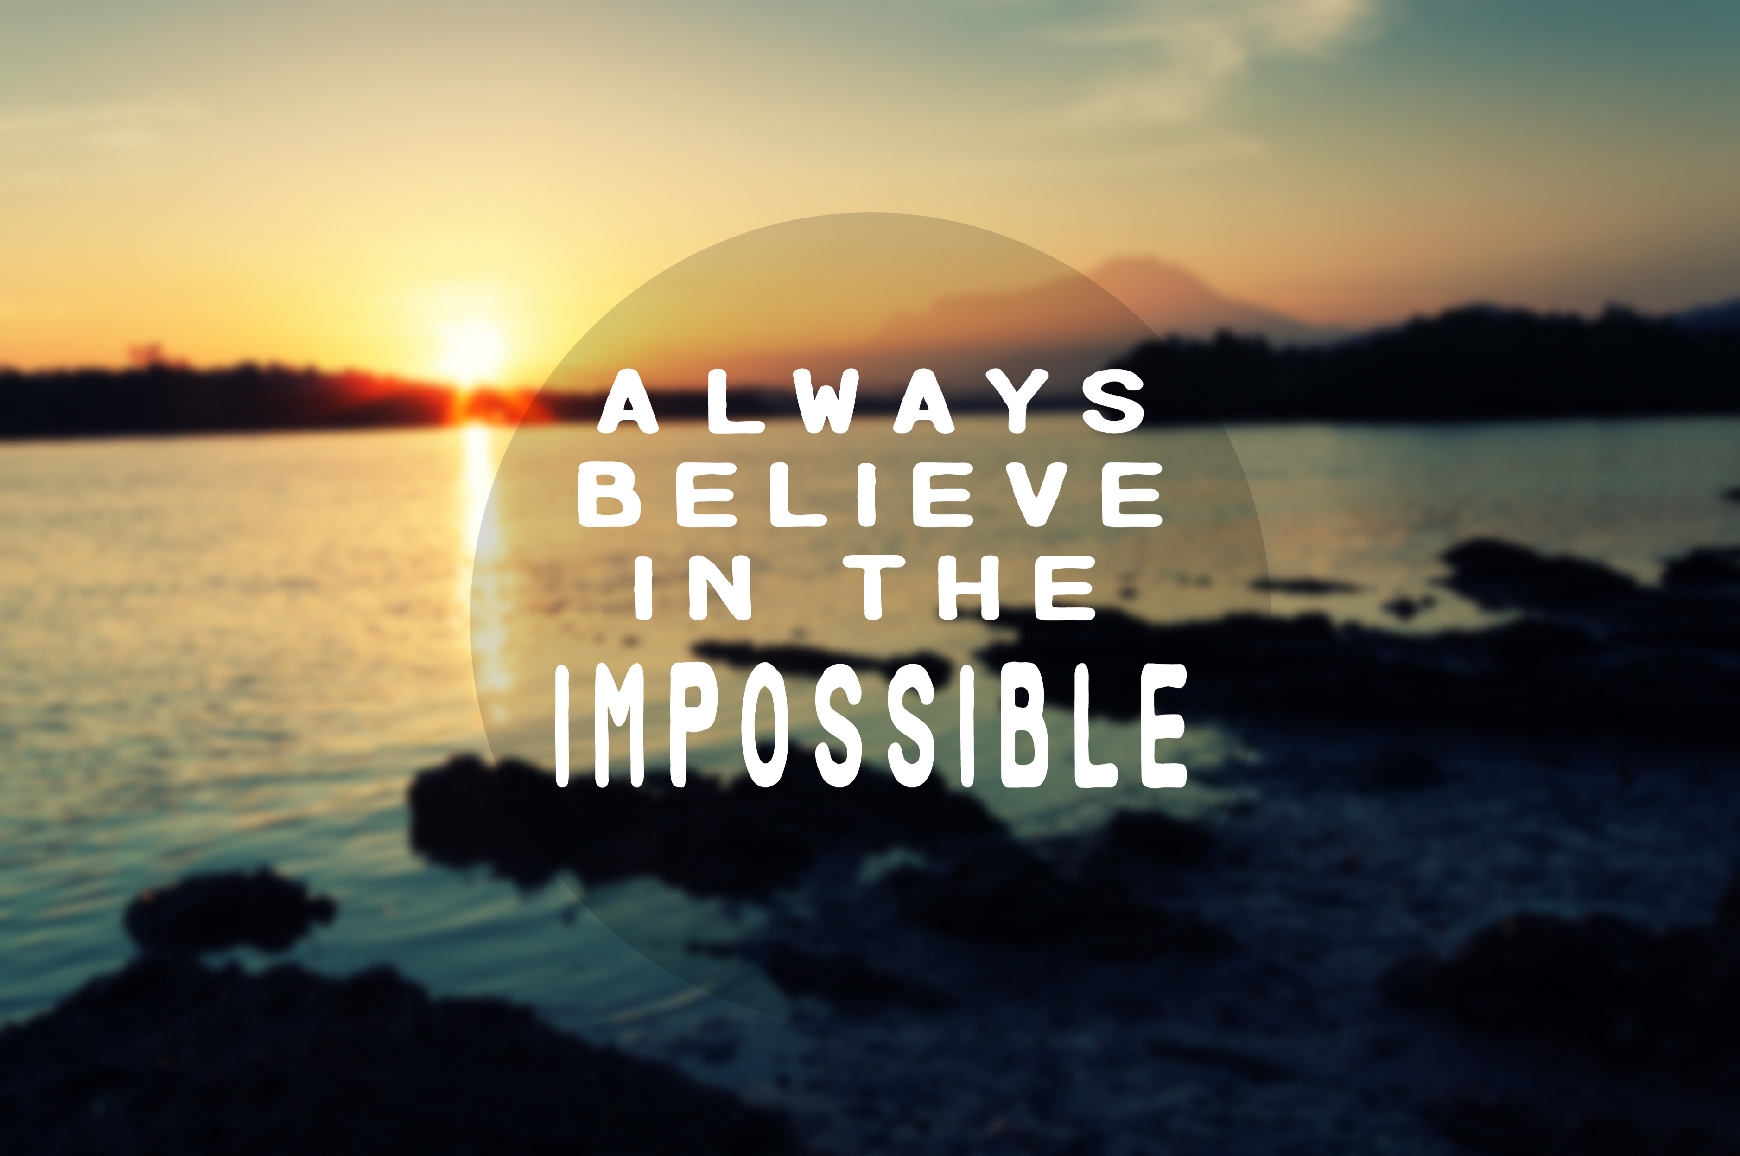 Believing The Impossible Today!